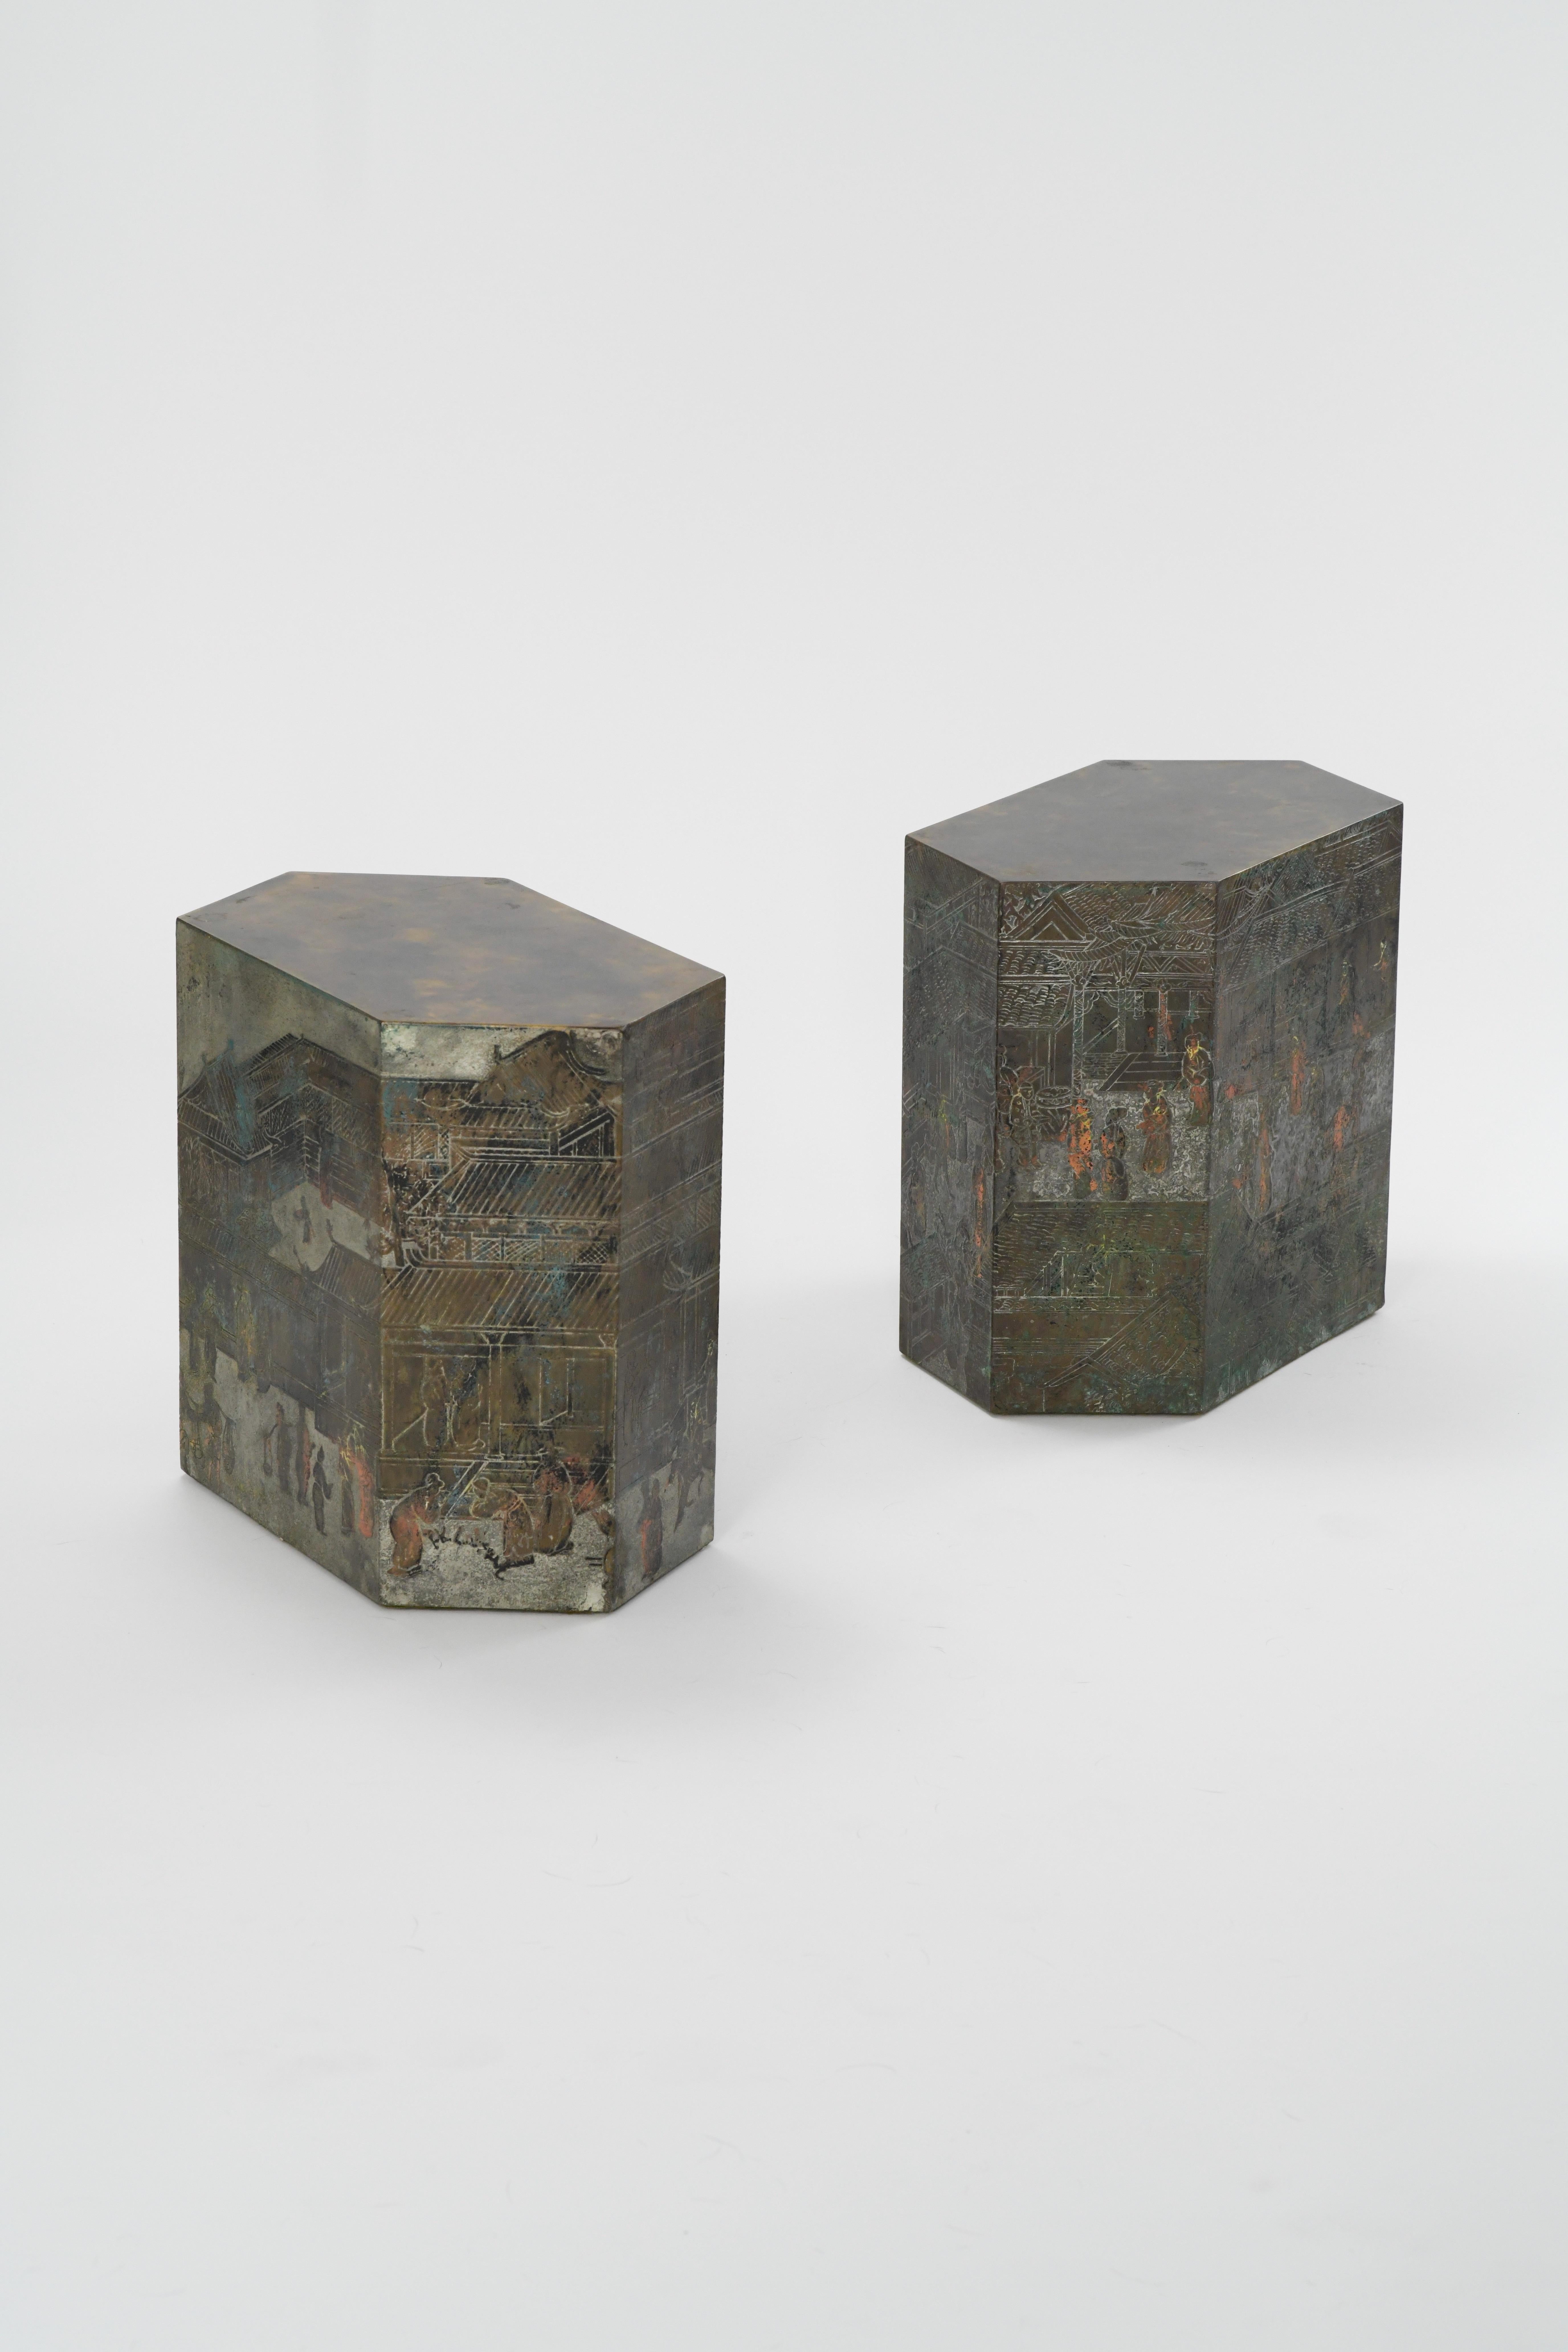 From the incredible father/son duo Philip and Kelvin LaVerne are these rare and extremely sought after Spring Festival patterned hexagonal occasional tables. These unique sculptural side tables are strong and sturdy and can be used as is or with an